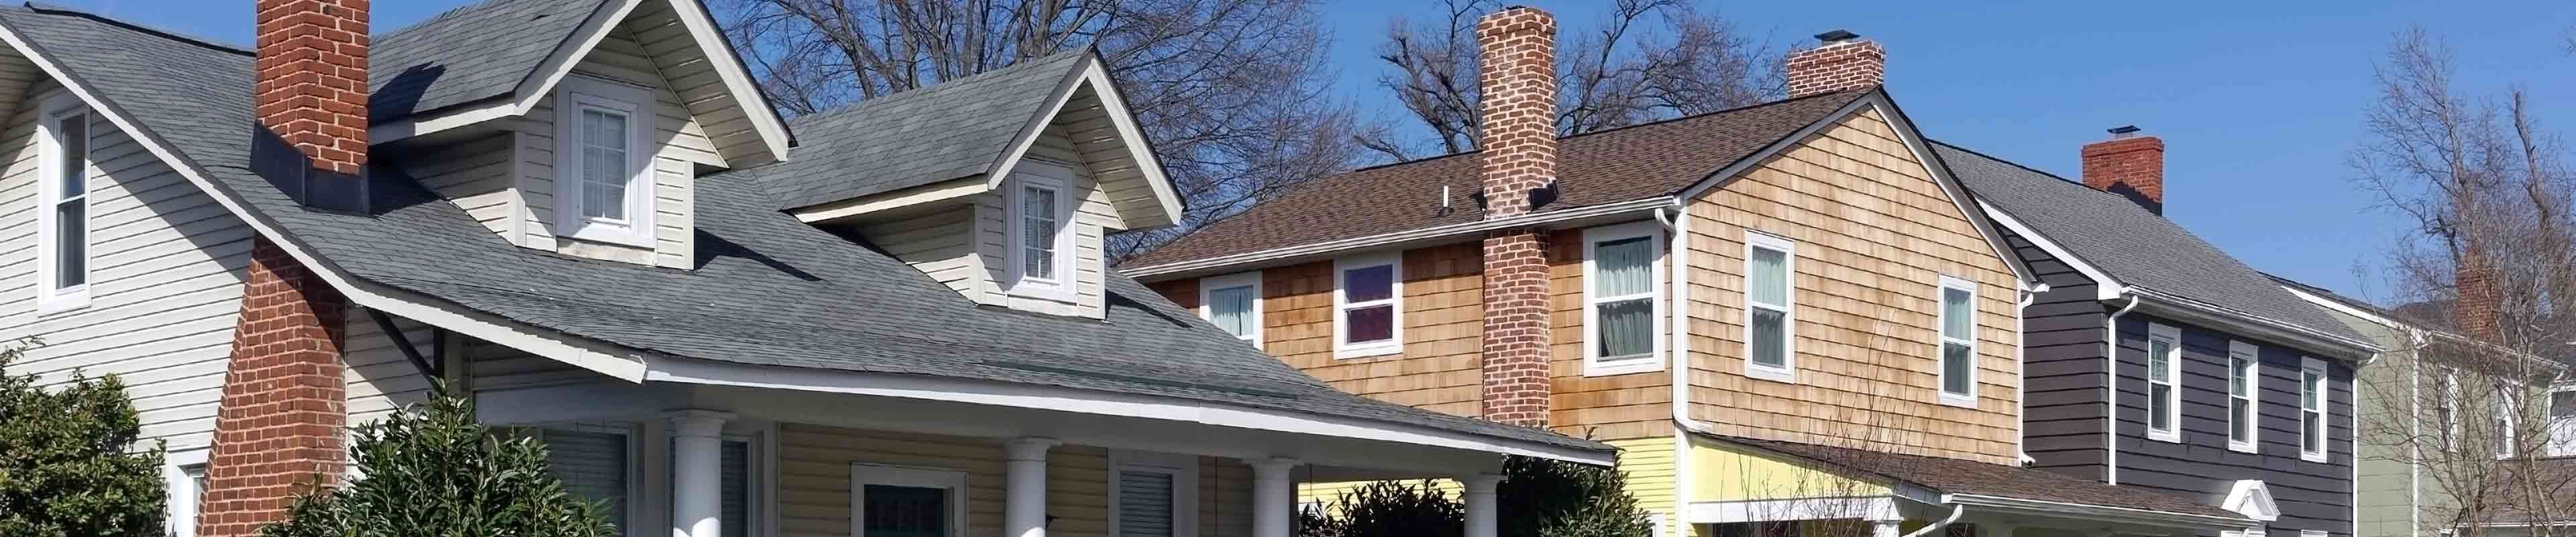 A row of houses with roofs vulnerable to roof leaks.